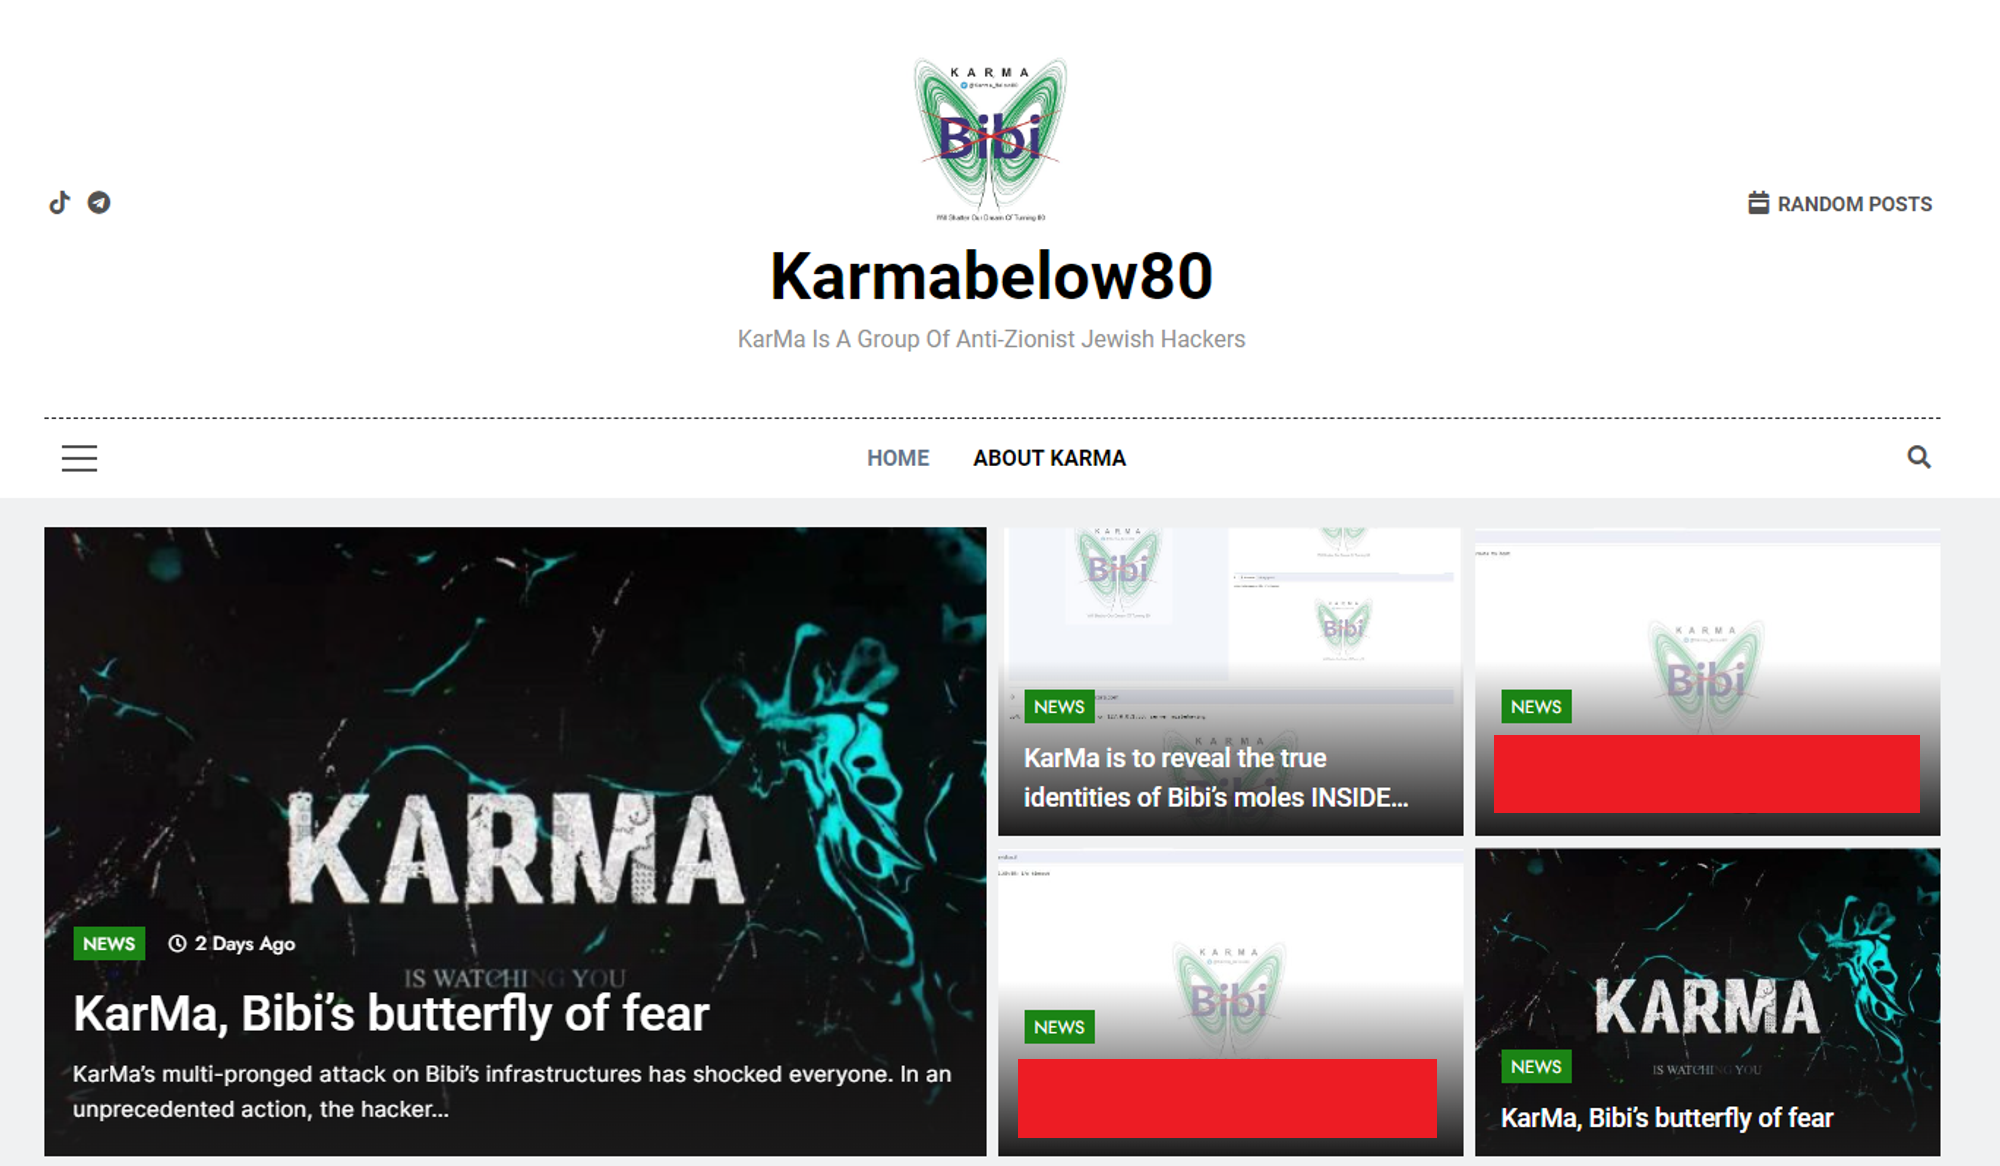 Figure 1 - A snippet from the Karmabelow80 website.